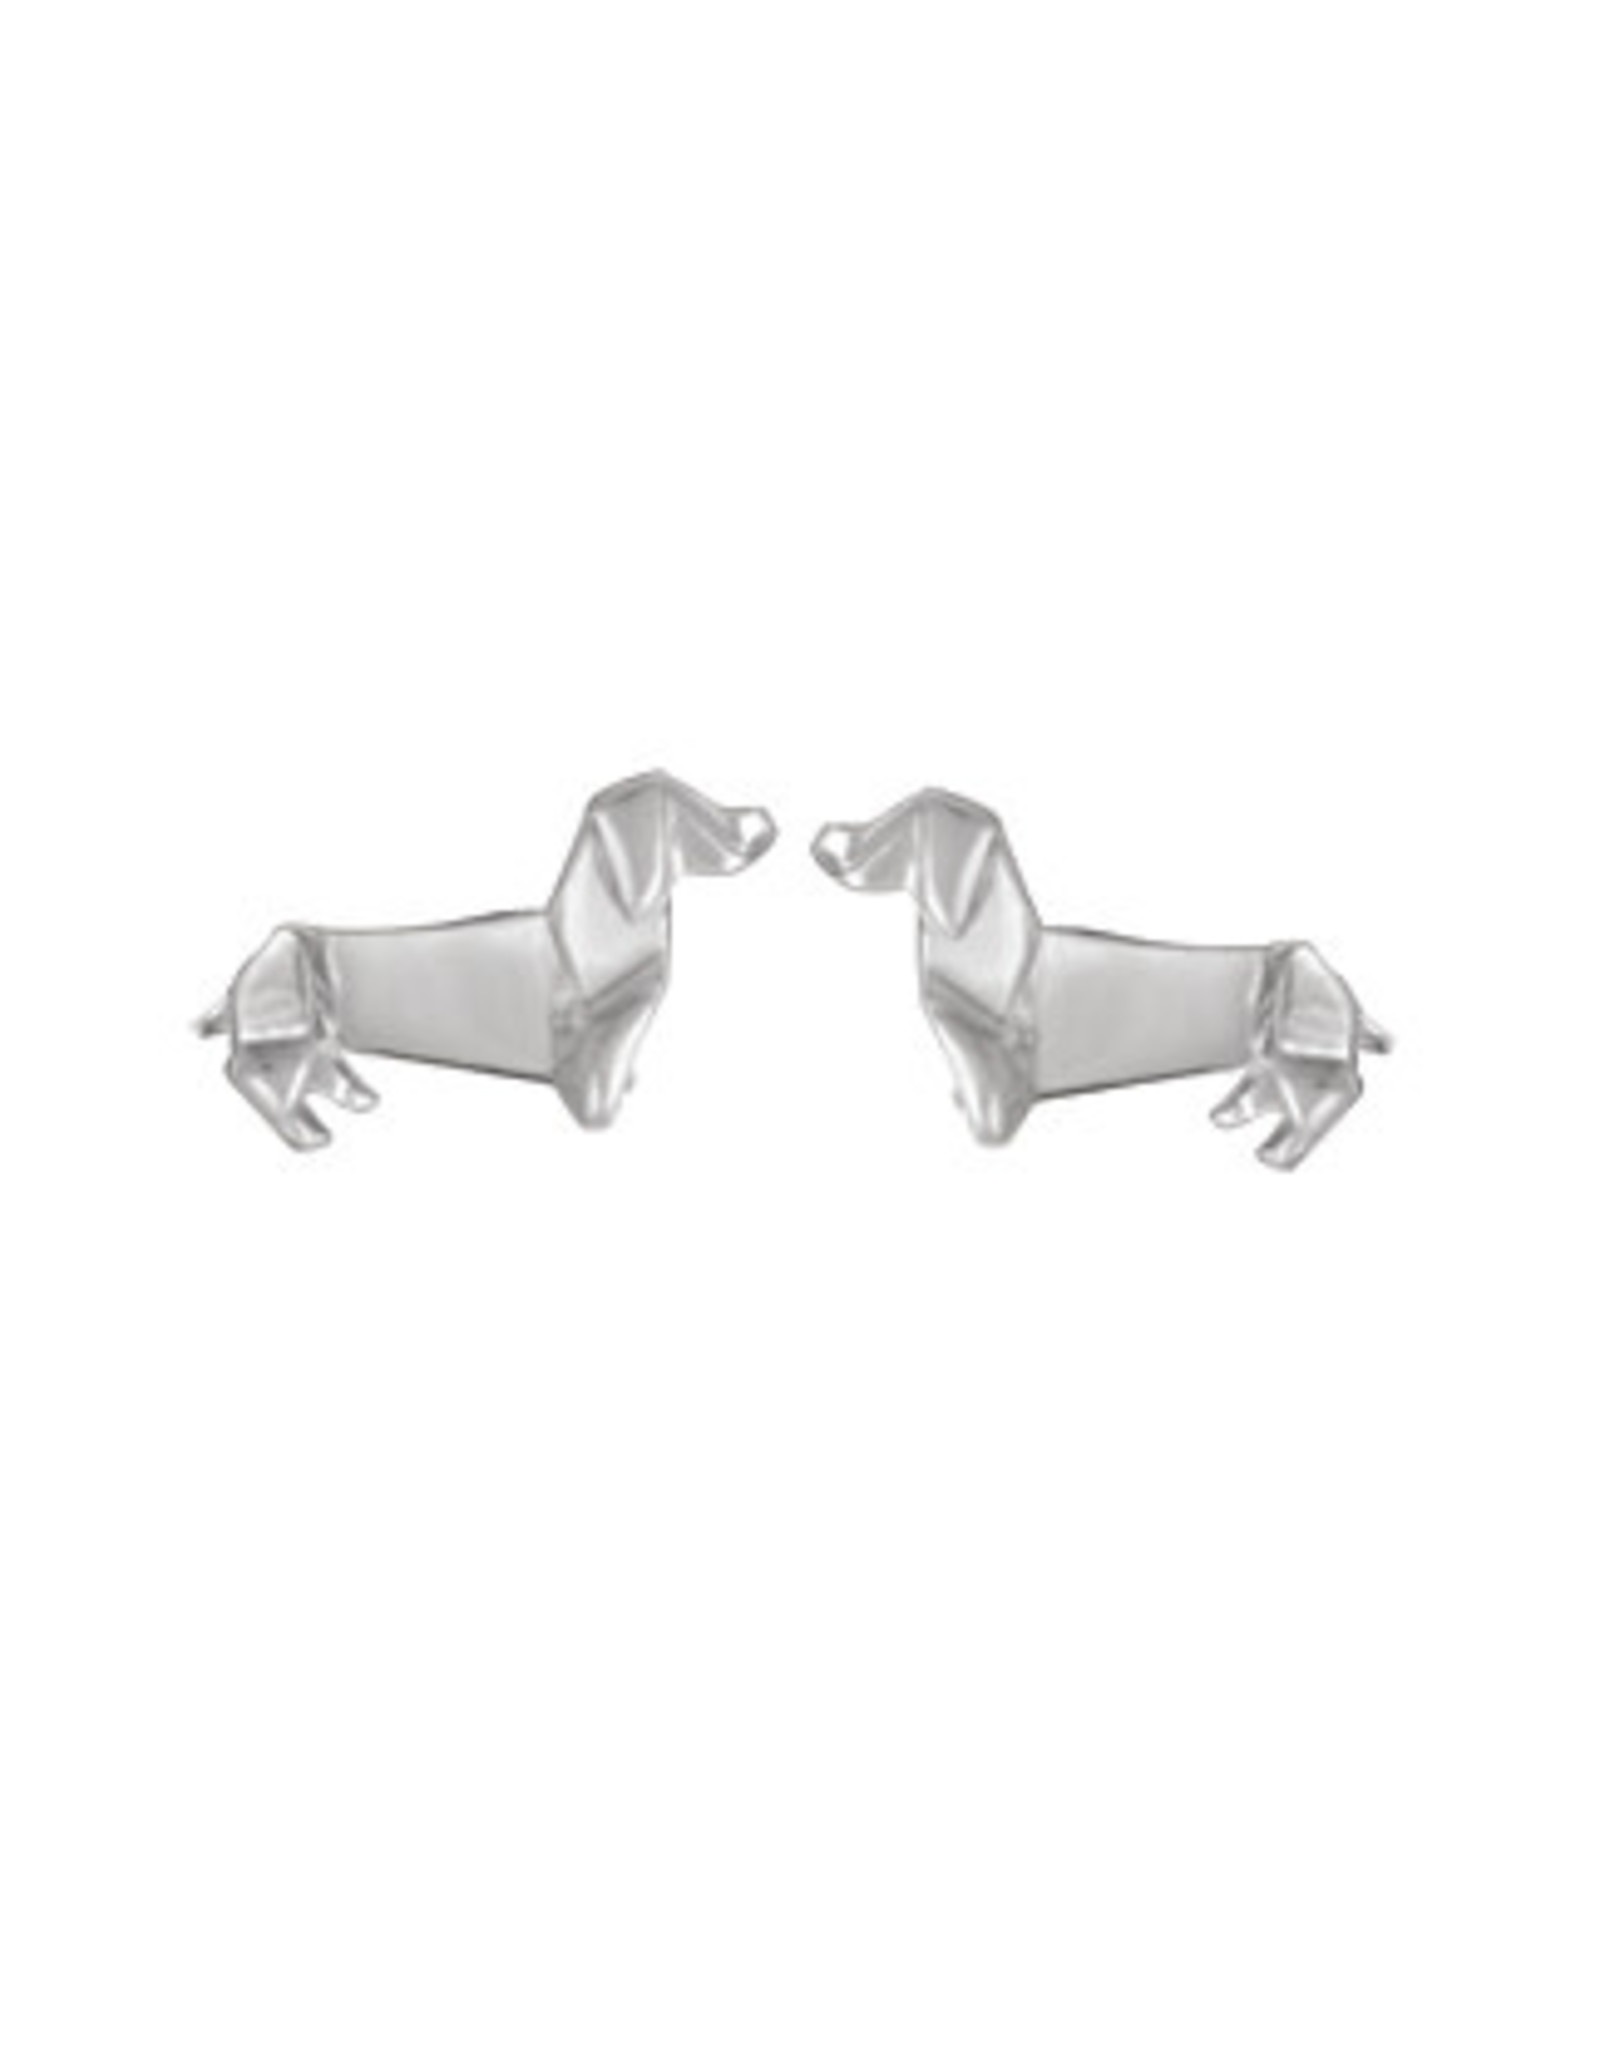 Boma DOG ORIGAMI STUD EARRING SILVER